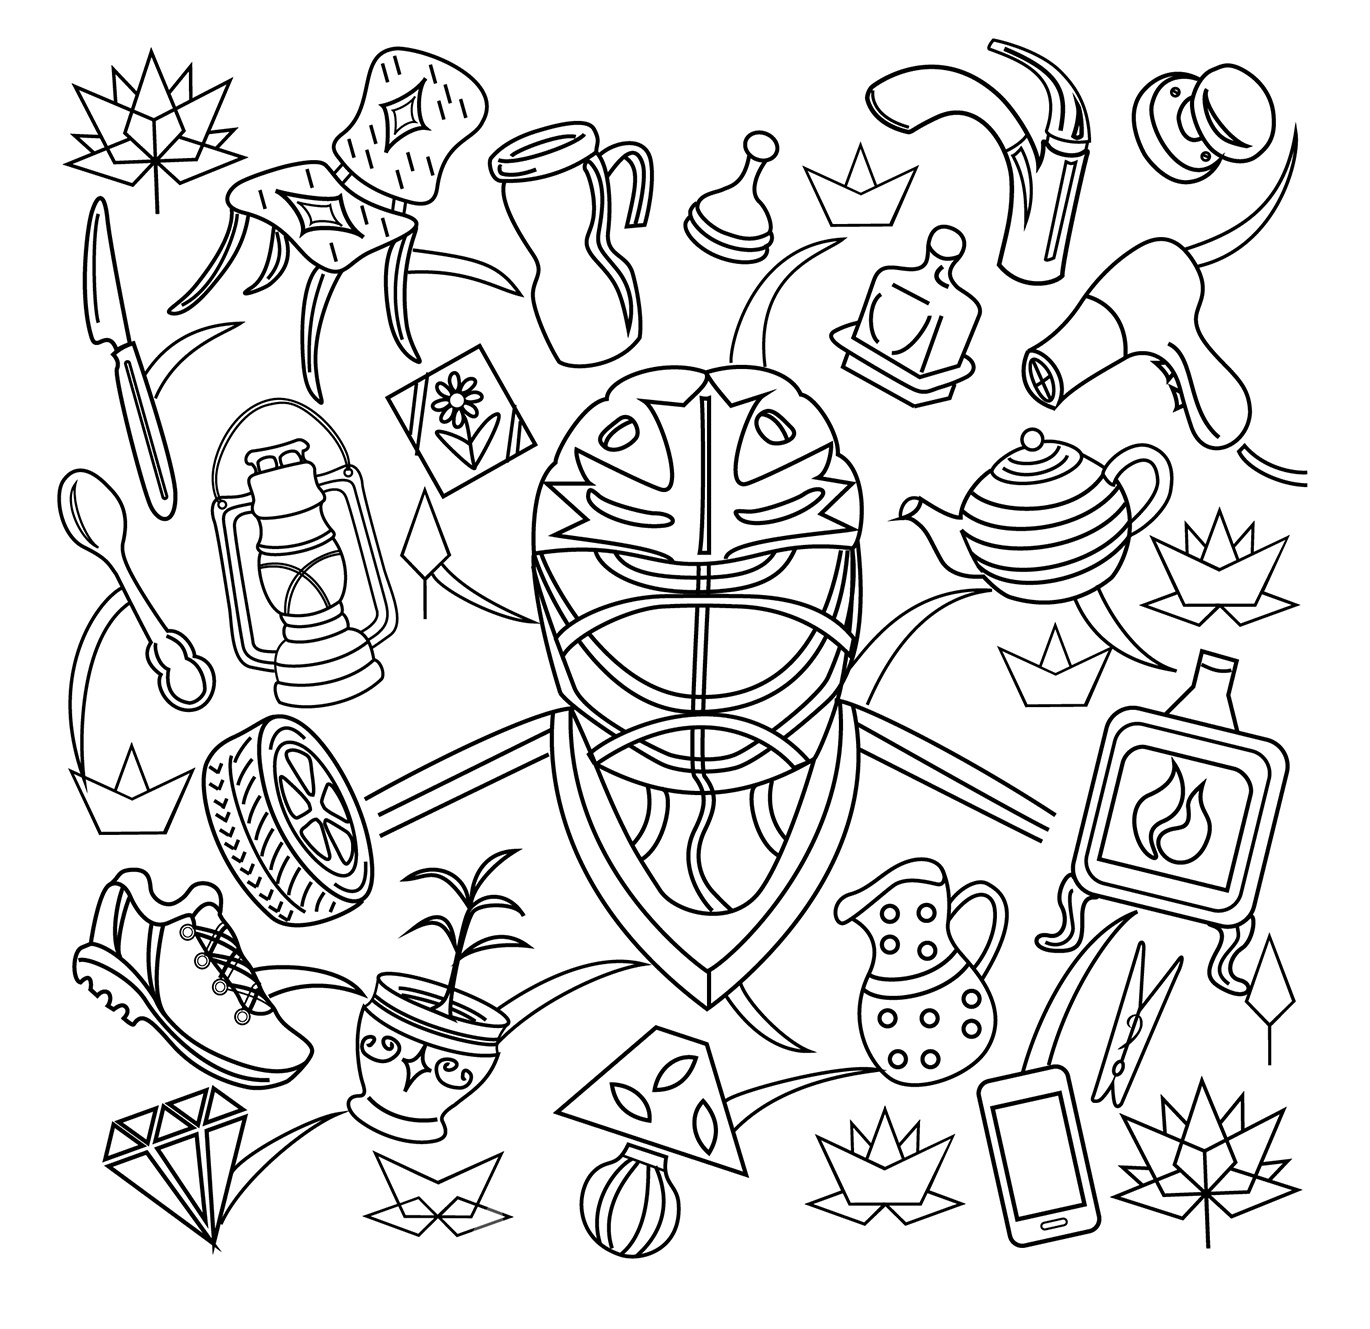 Colouring page featuring sample items that could be subject matter for industrial design registration and a description of industrial design.